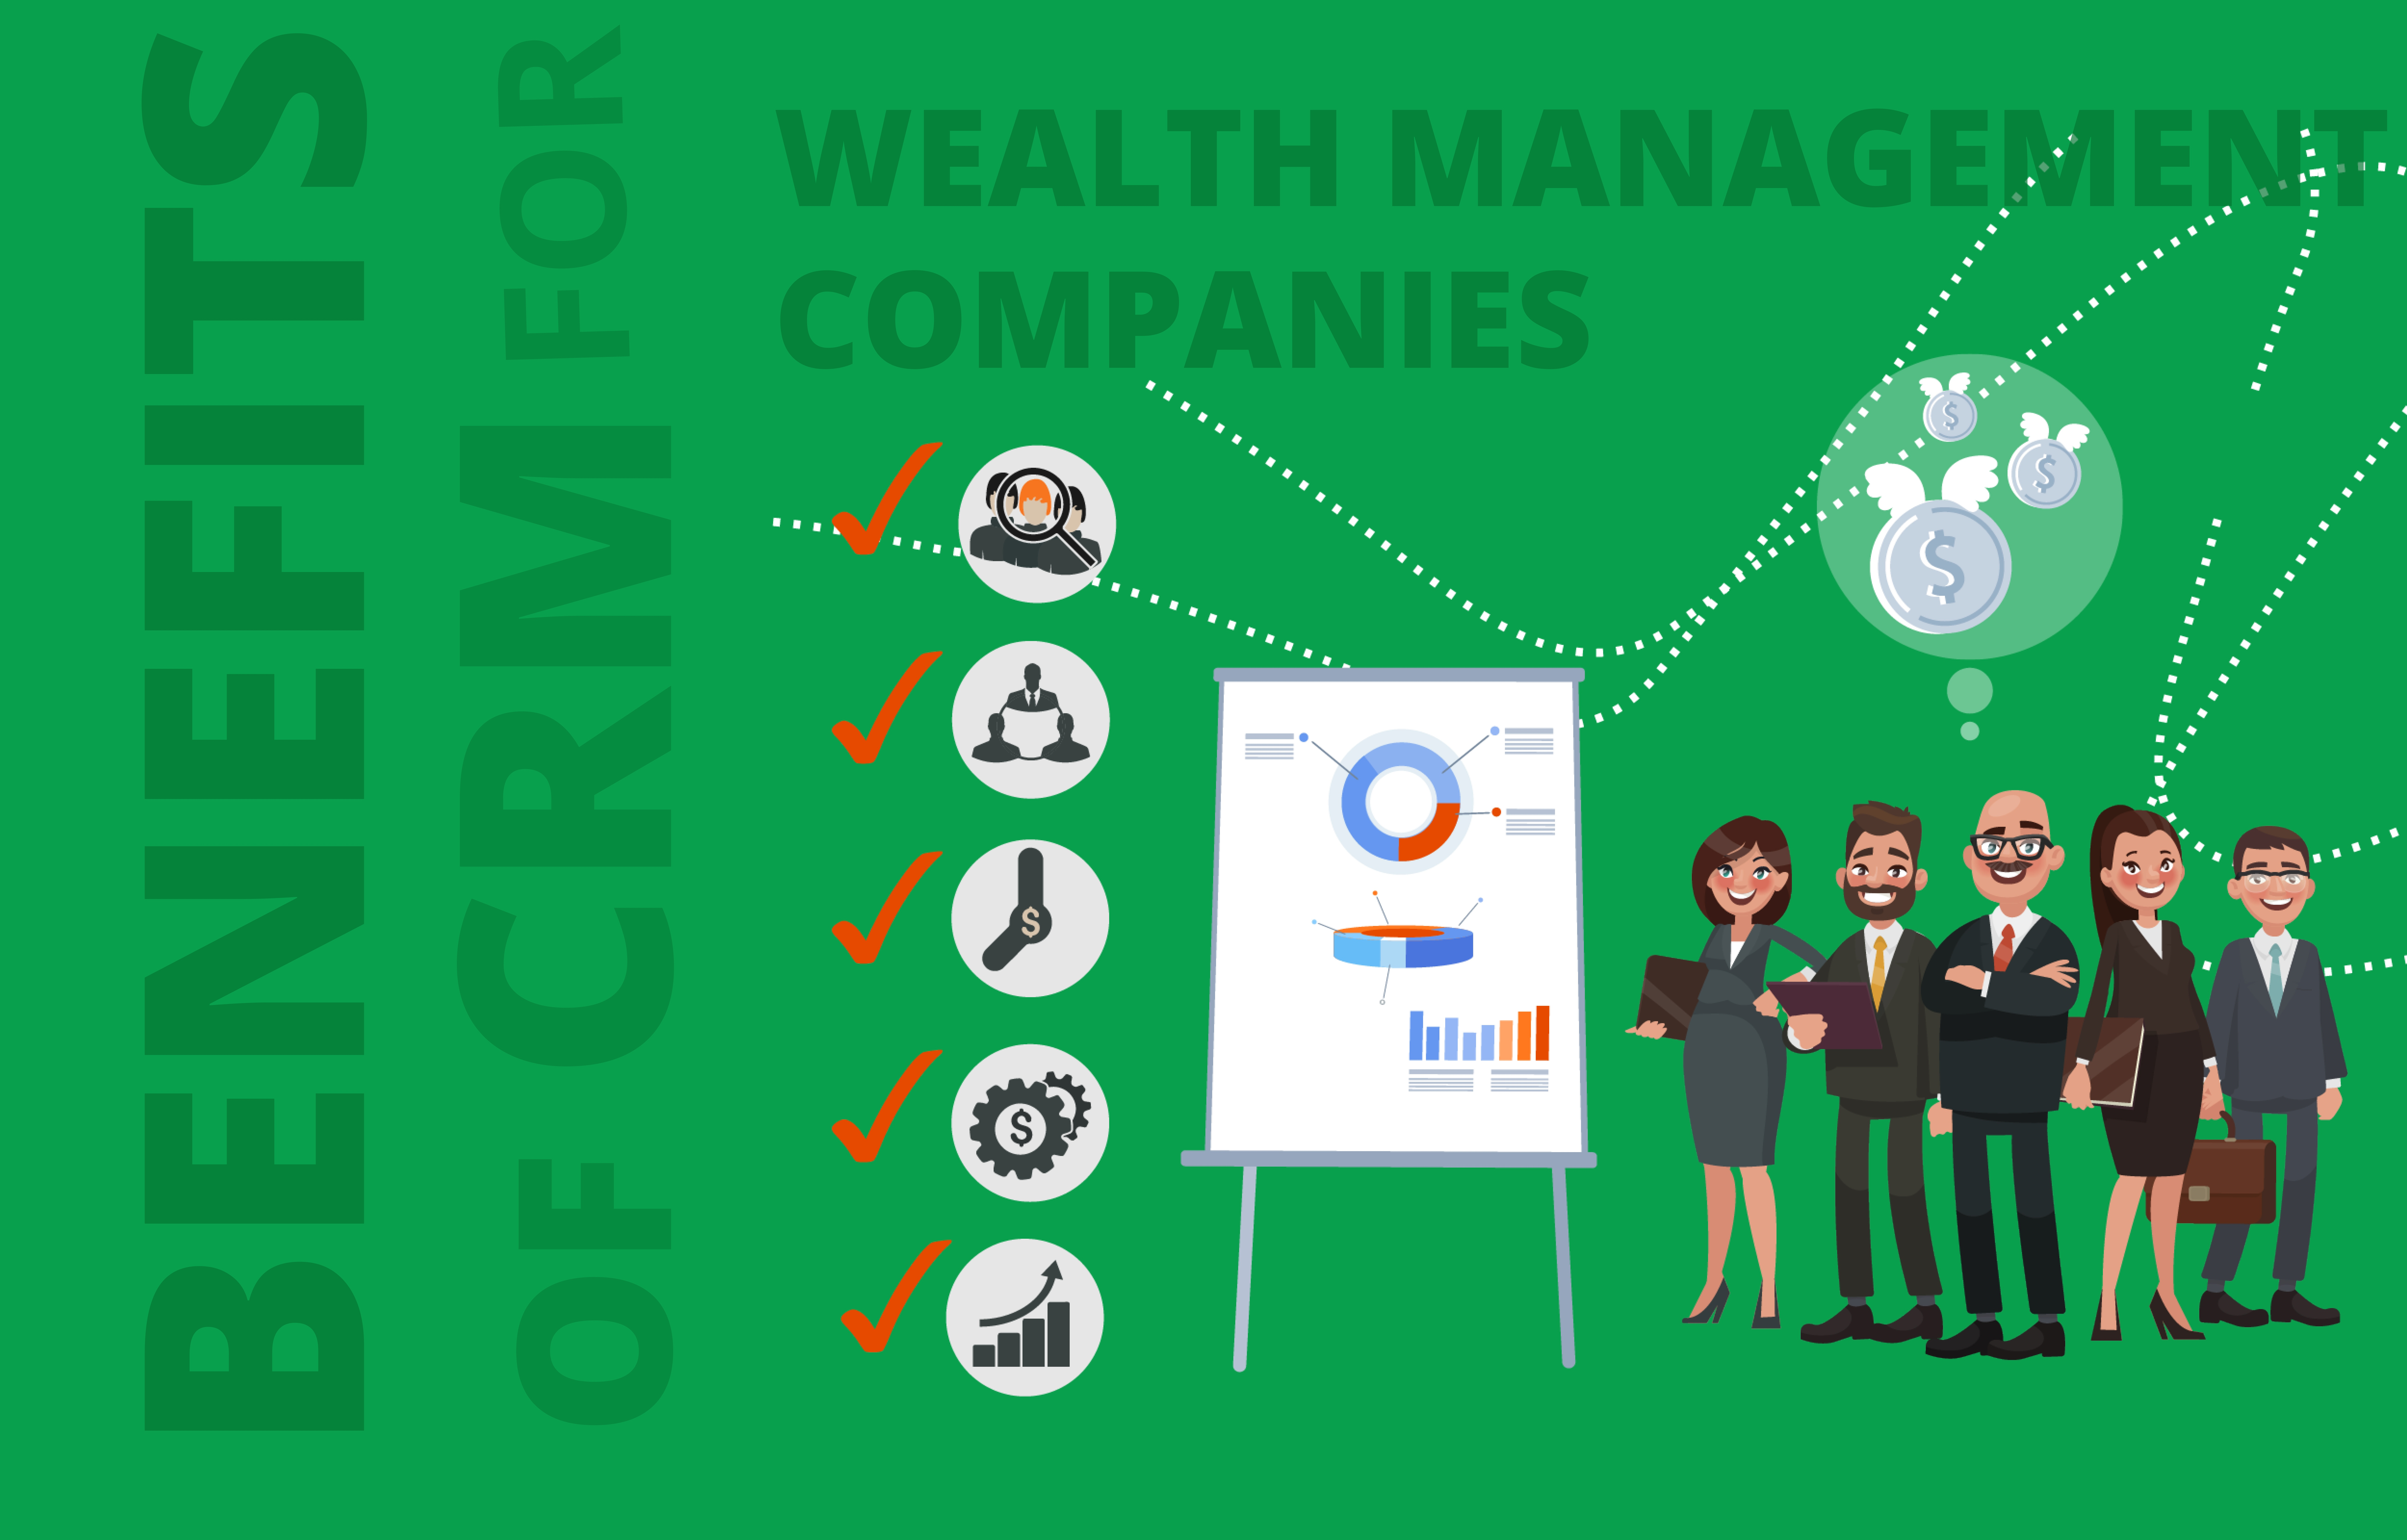 Wealth Managers CRM: 4 Benefits for Wealth Management Companies